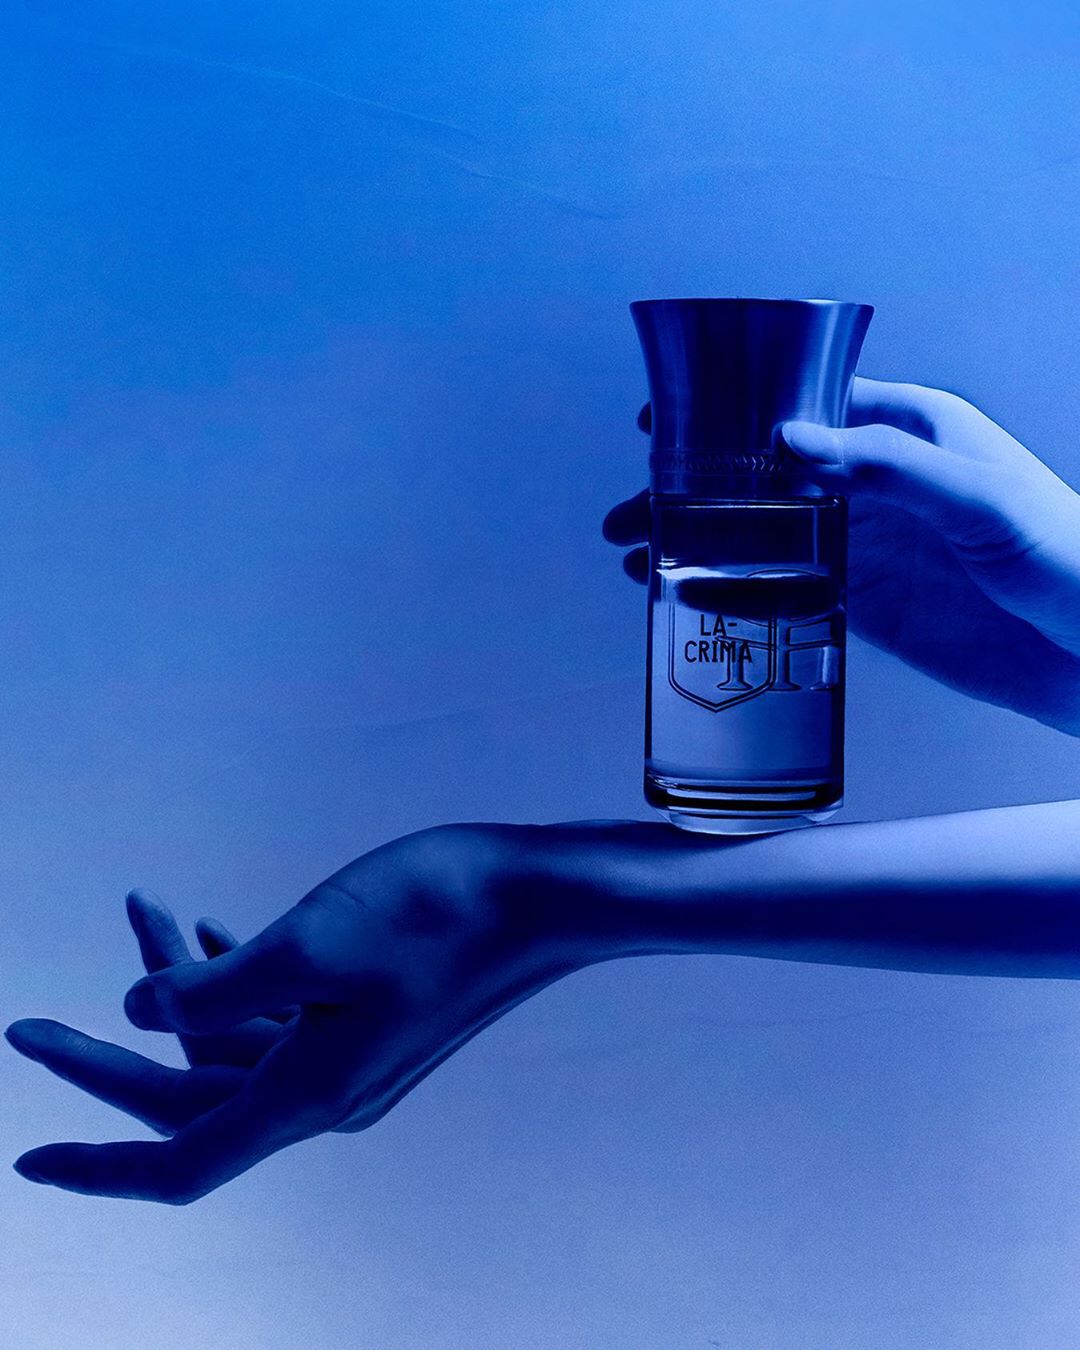 Liquides Imaginaires - Lacrima - Les Humeurs
A drop of crystal which lands on your cheek
Picture @mooncube 
#LiquidesImaginaires #LesHumeurs #Lacrima #PerfumeOriginal